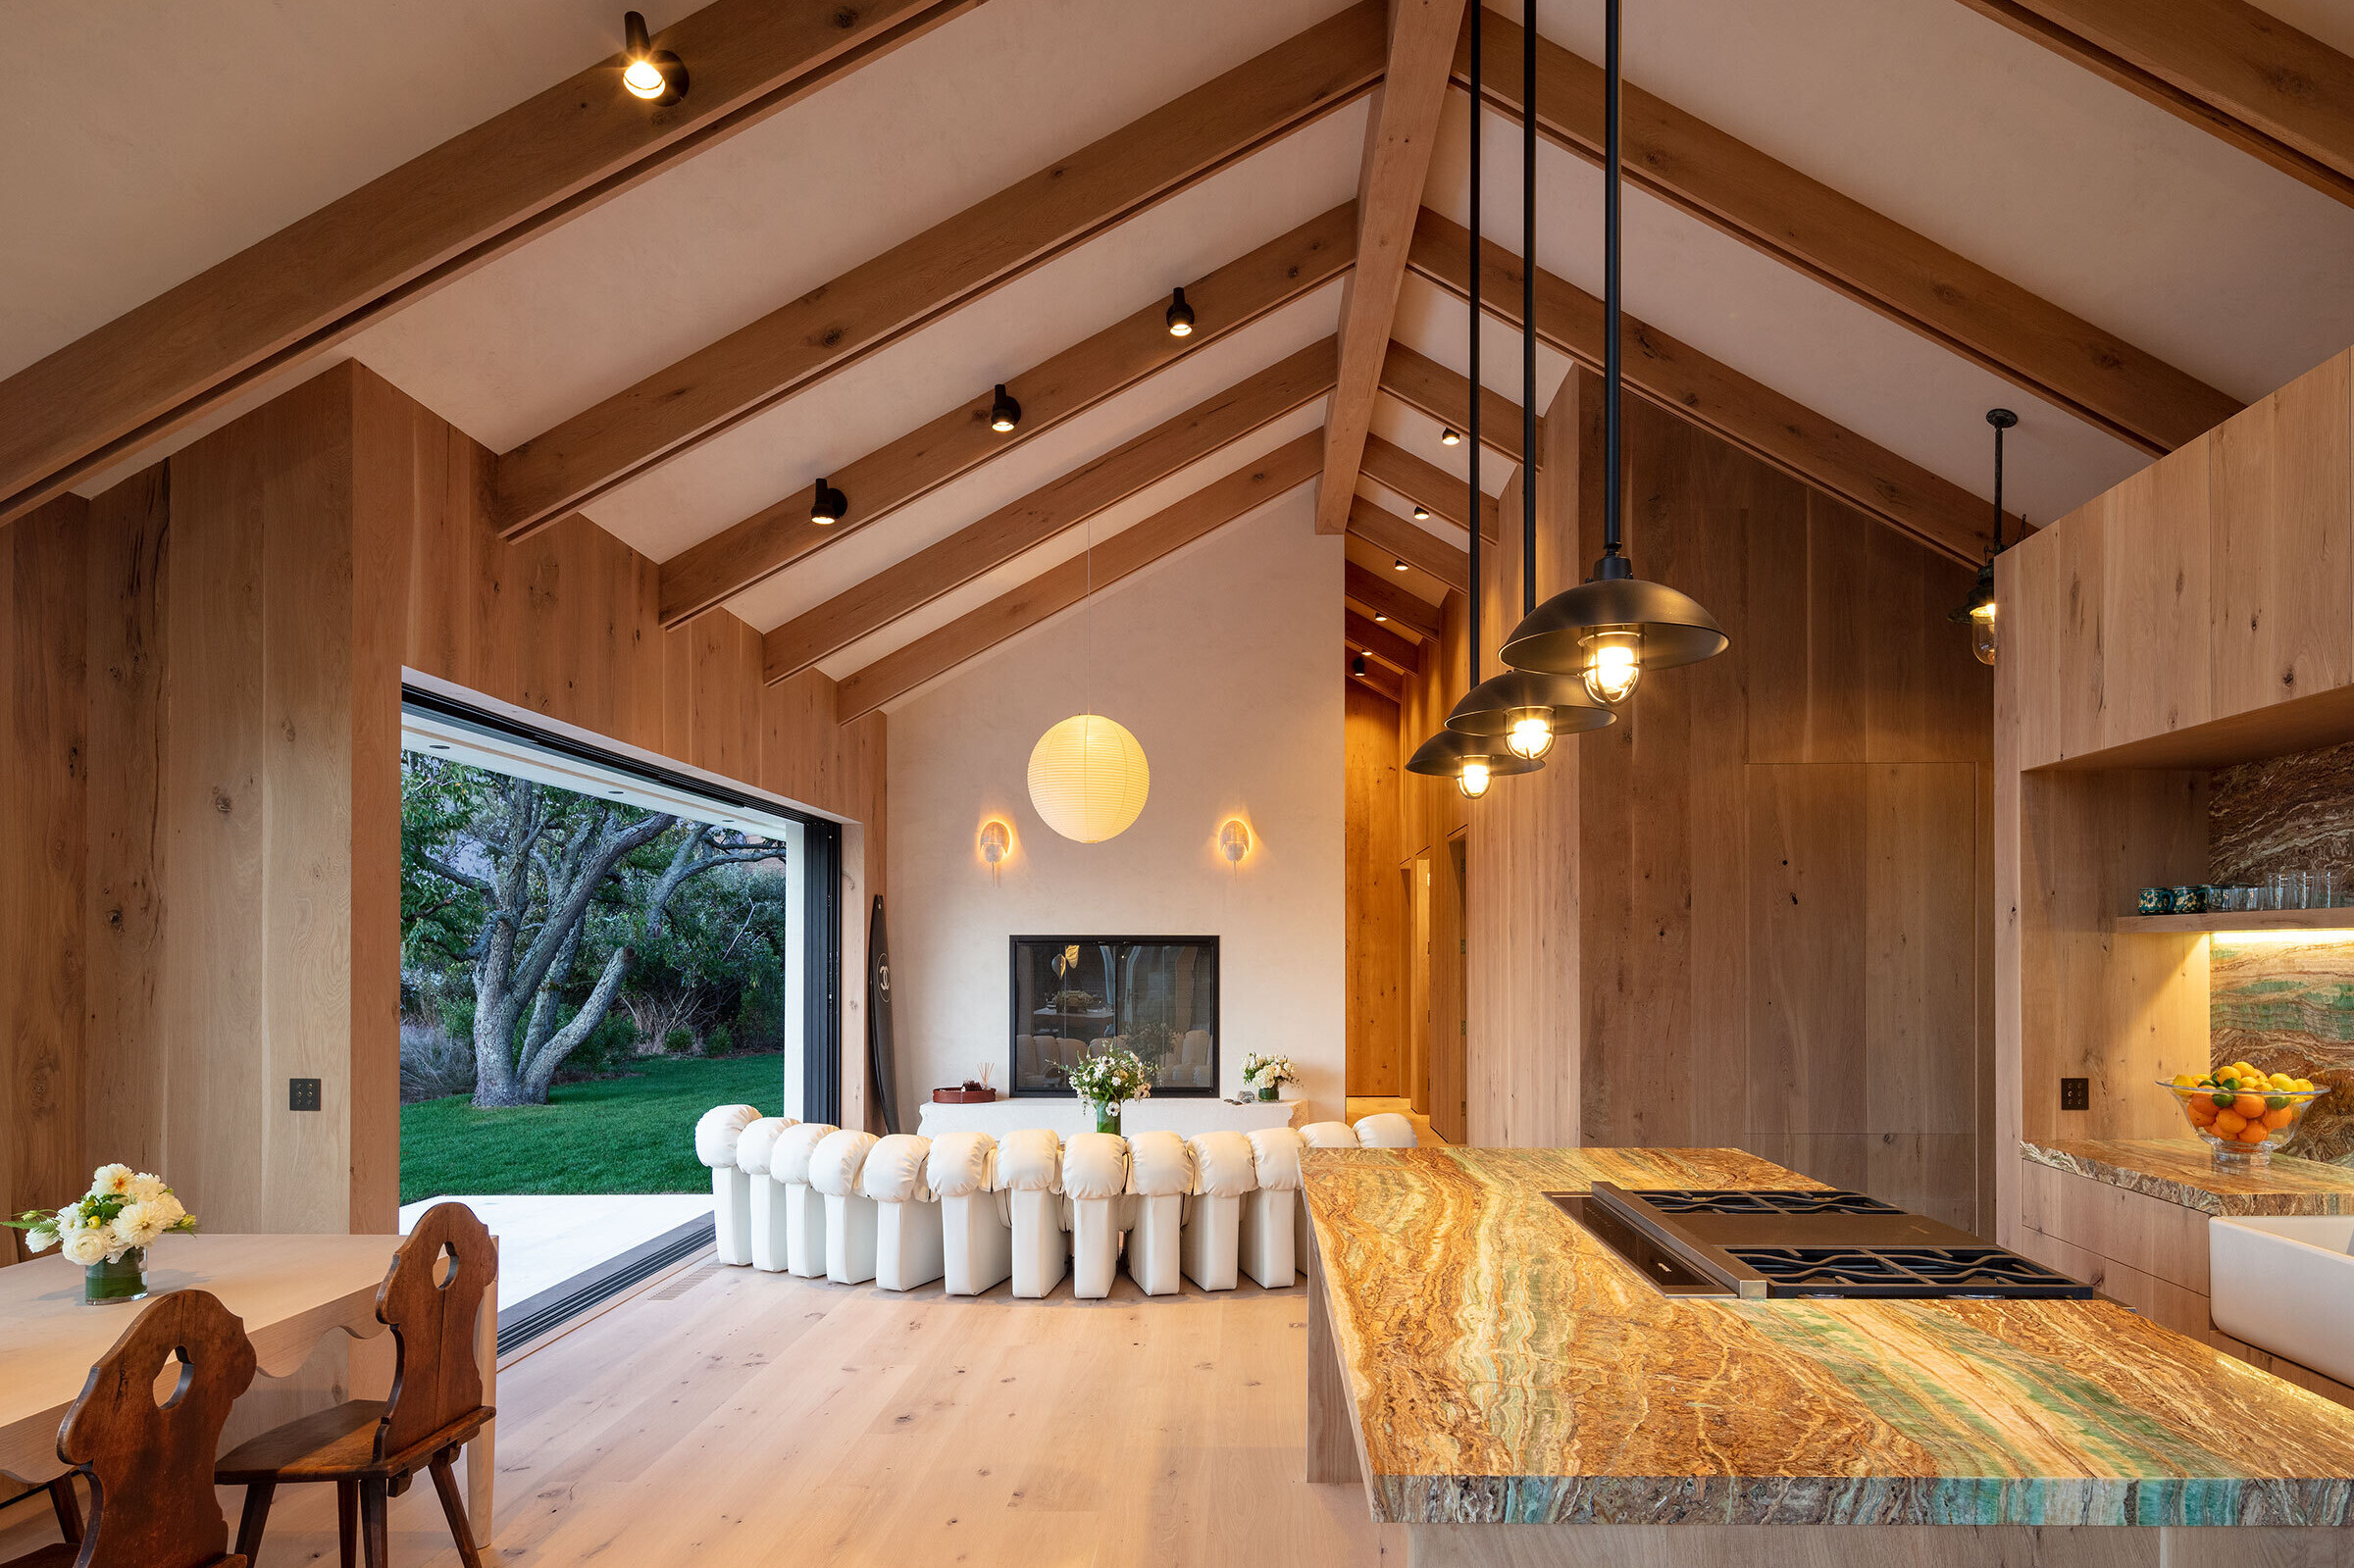 Ketra Tunable LED Lighting in Pendants from A-Frame Ceiling